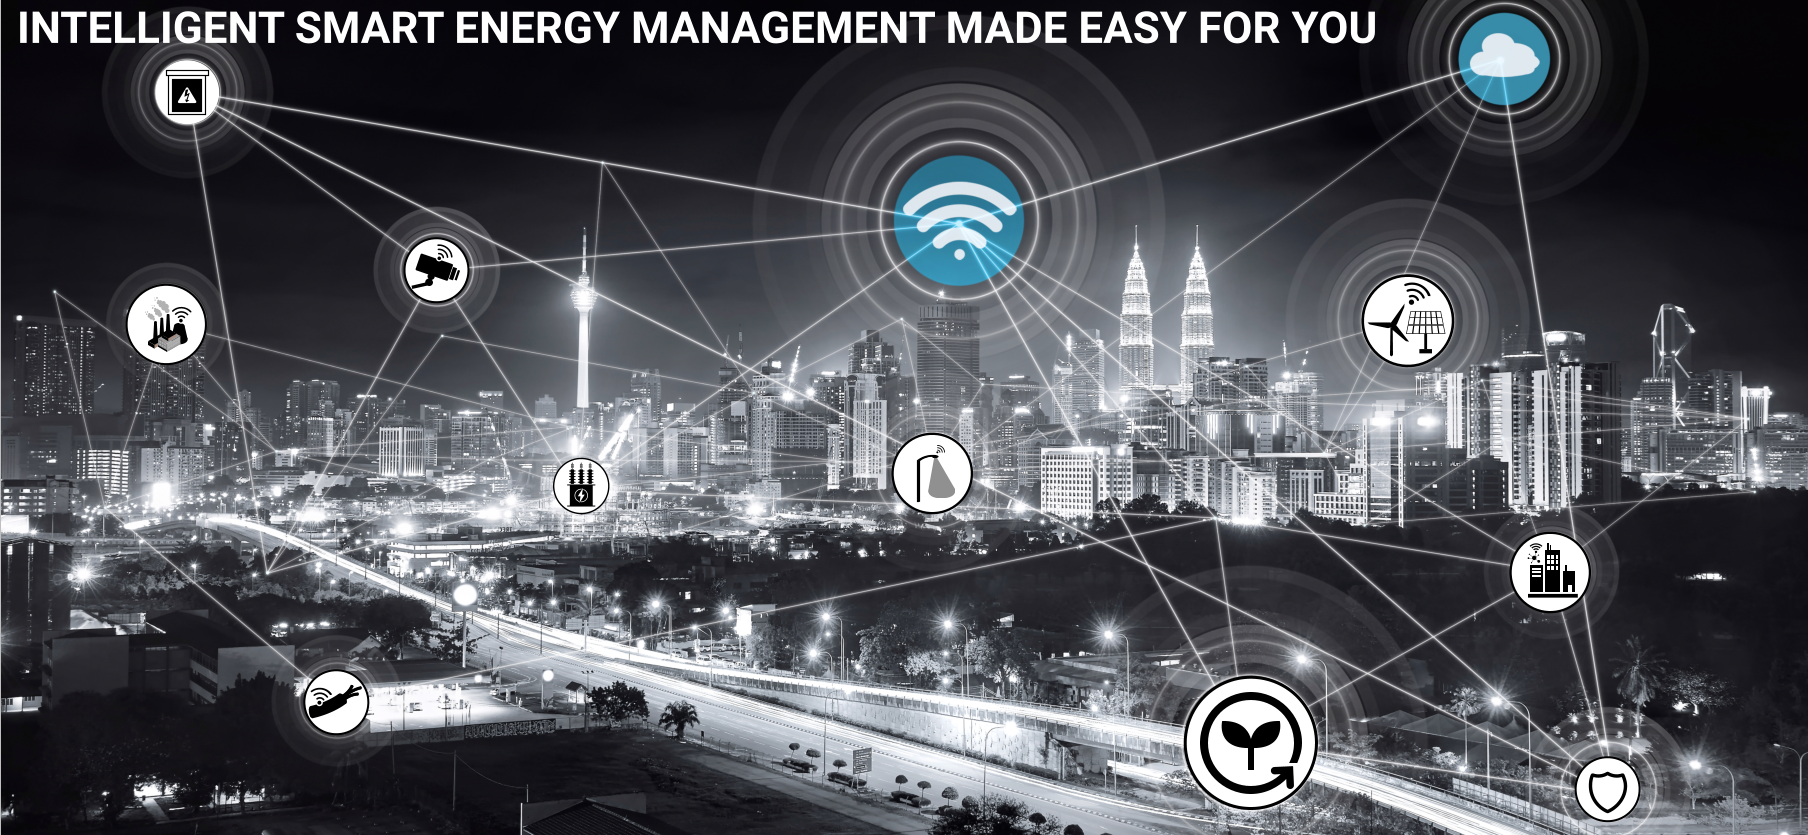 INTELLIGENT SMART ENERGY MANAGEMENT MADE EASY FOR YOU